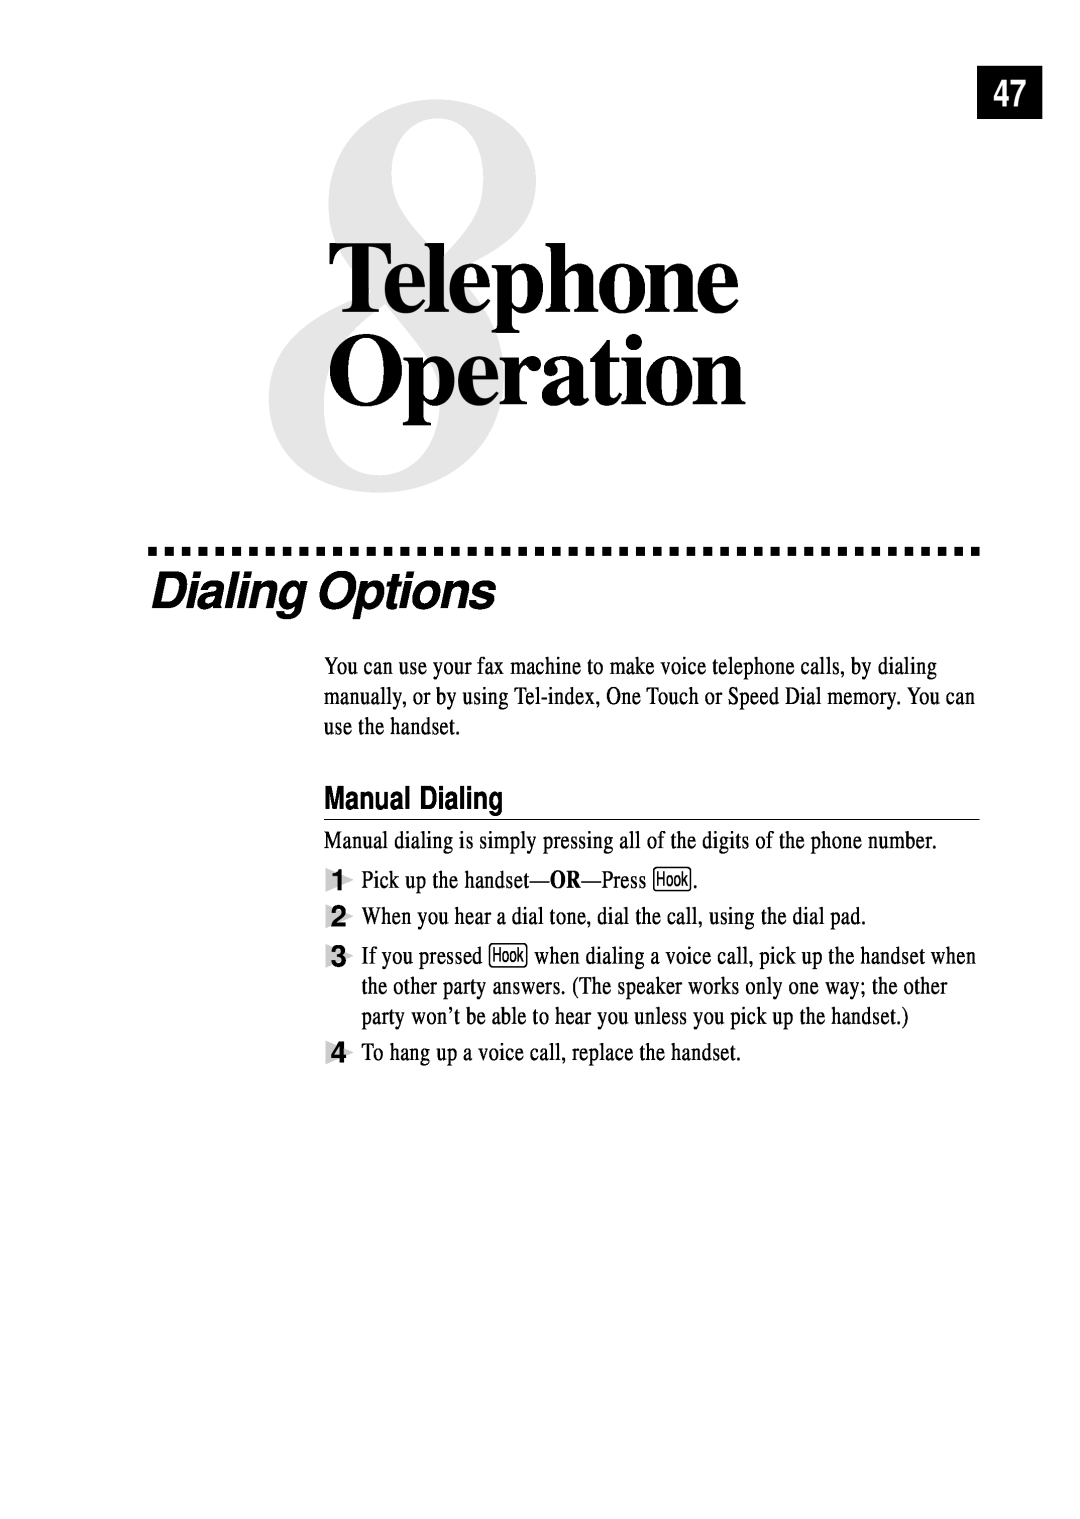 Brother FAX 255 owner manual 8Telephone 47 Operation, Dialing Options, Manual Dialing 